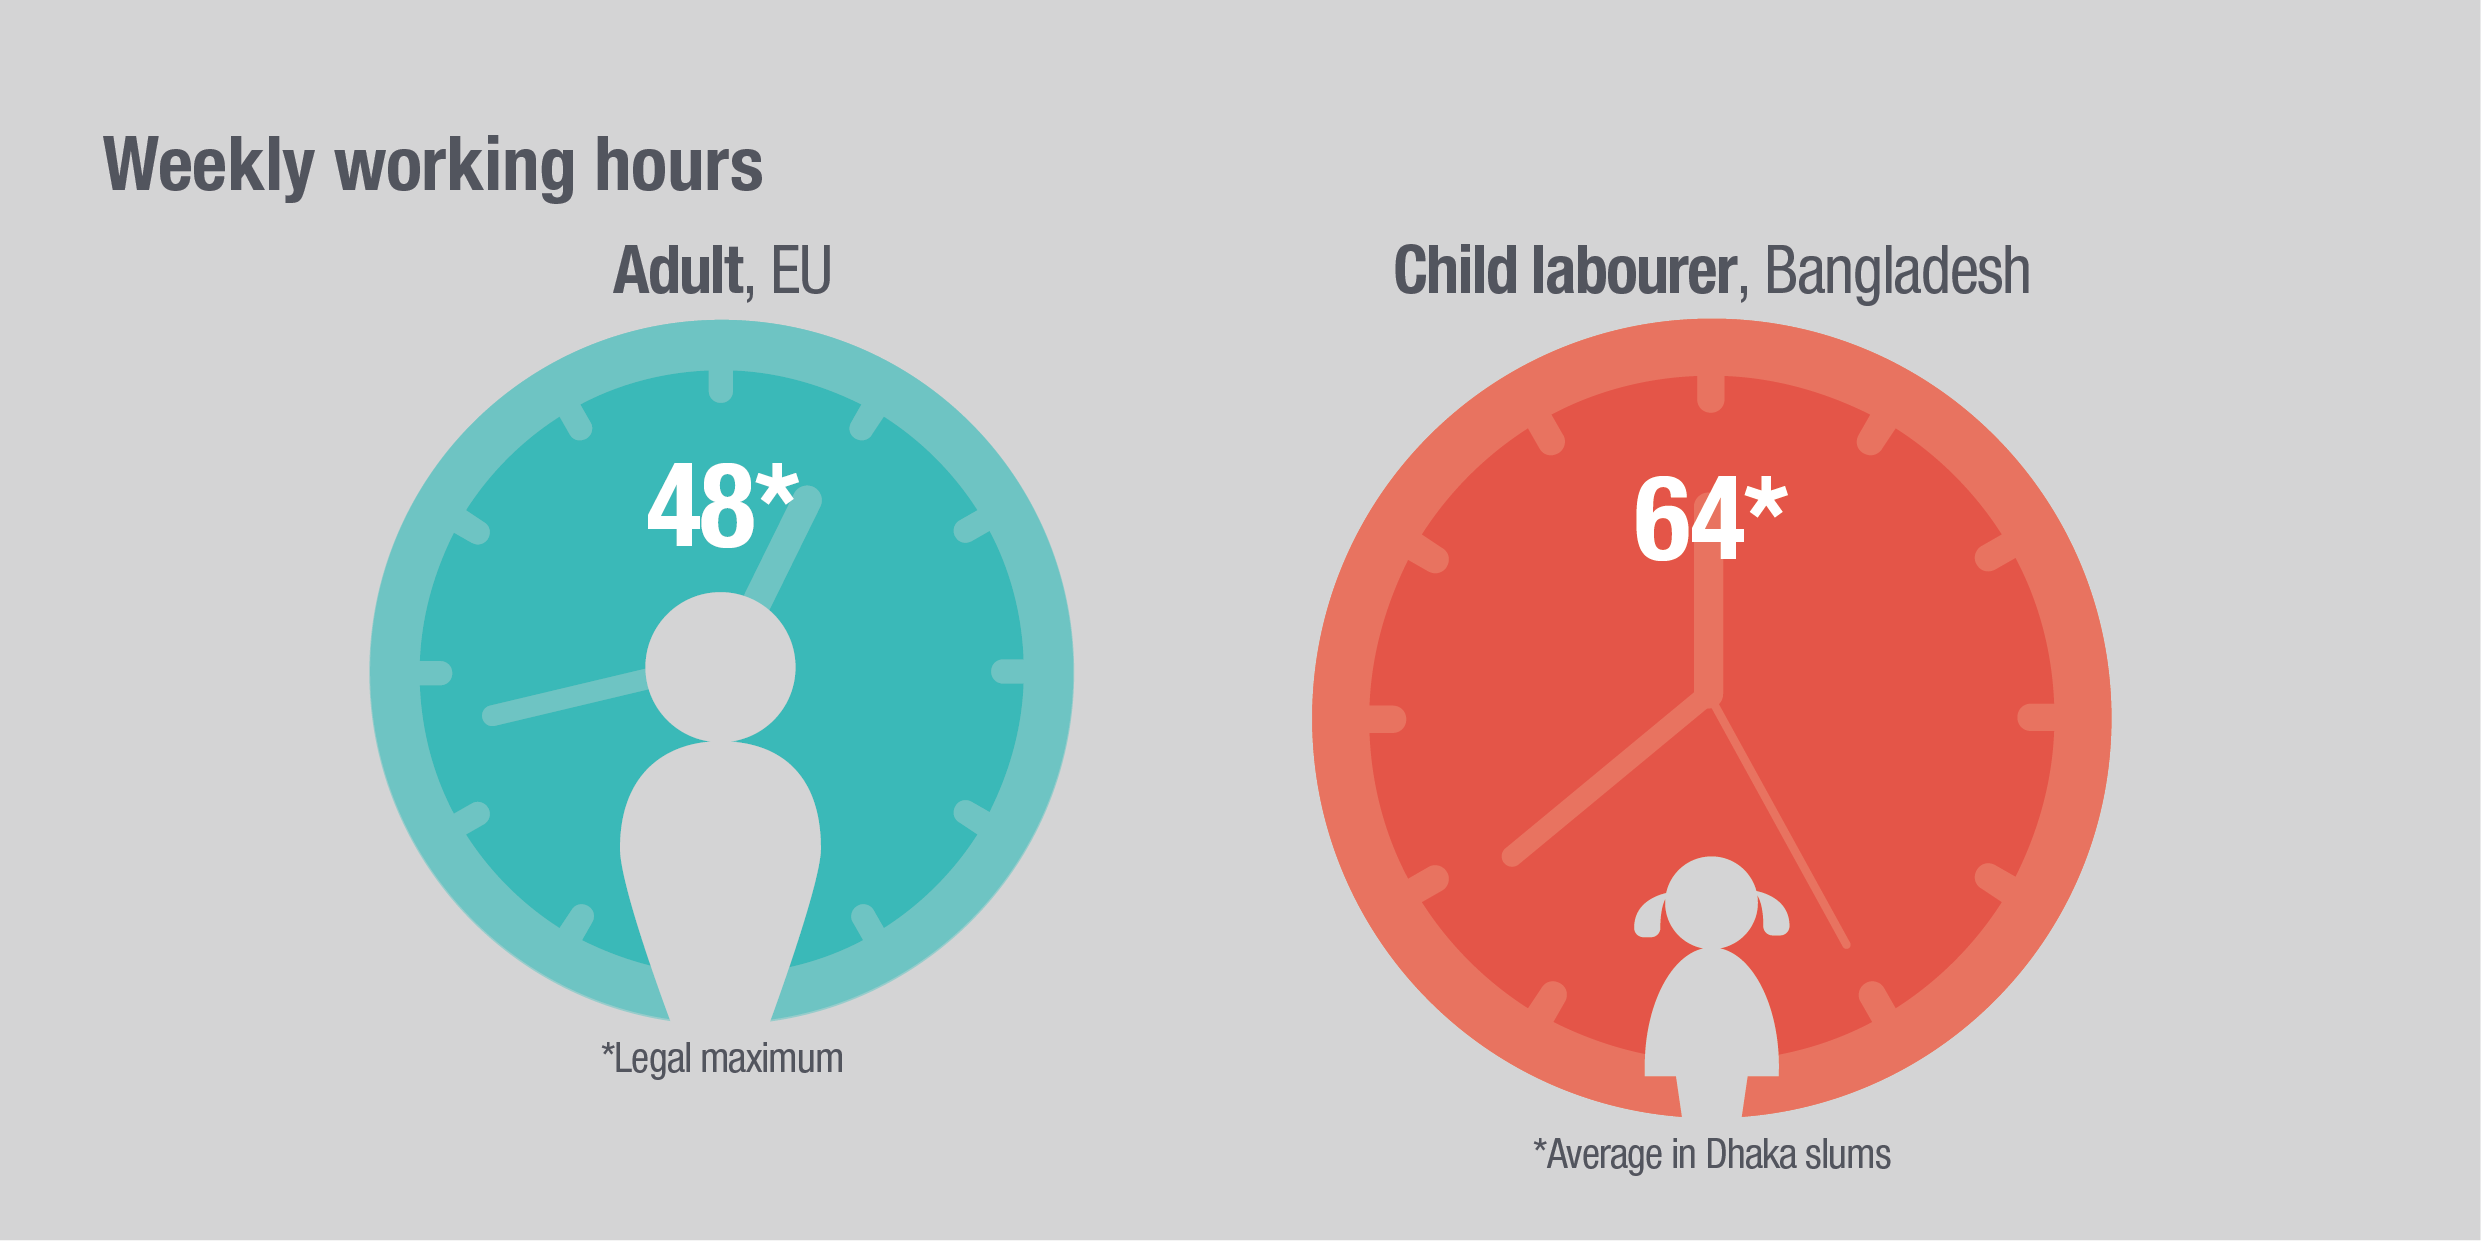 Infographic: weekly working hours of child labourers in Bangladesh vs adults in the EU